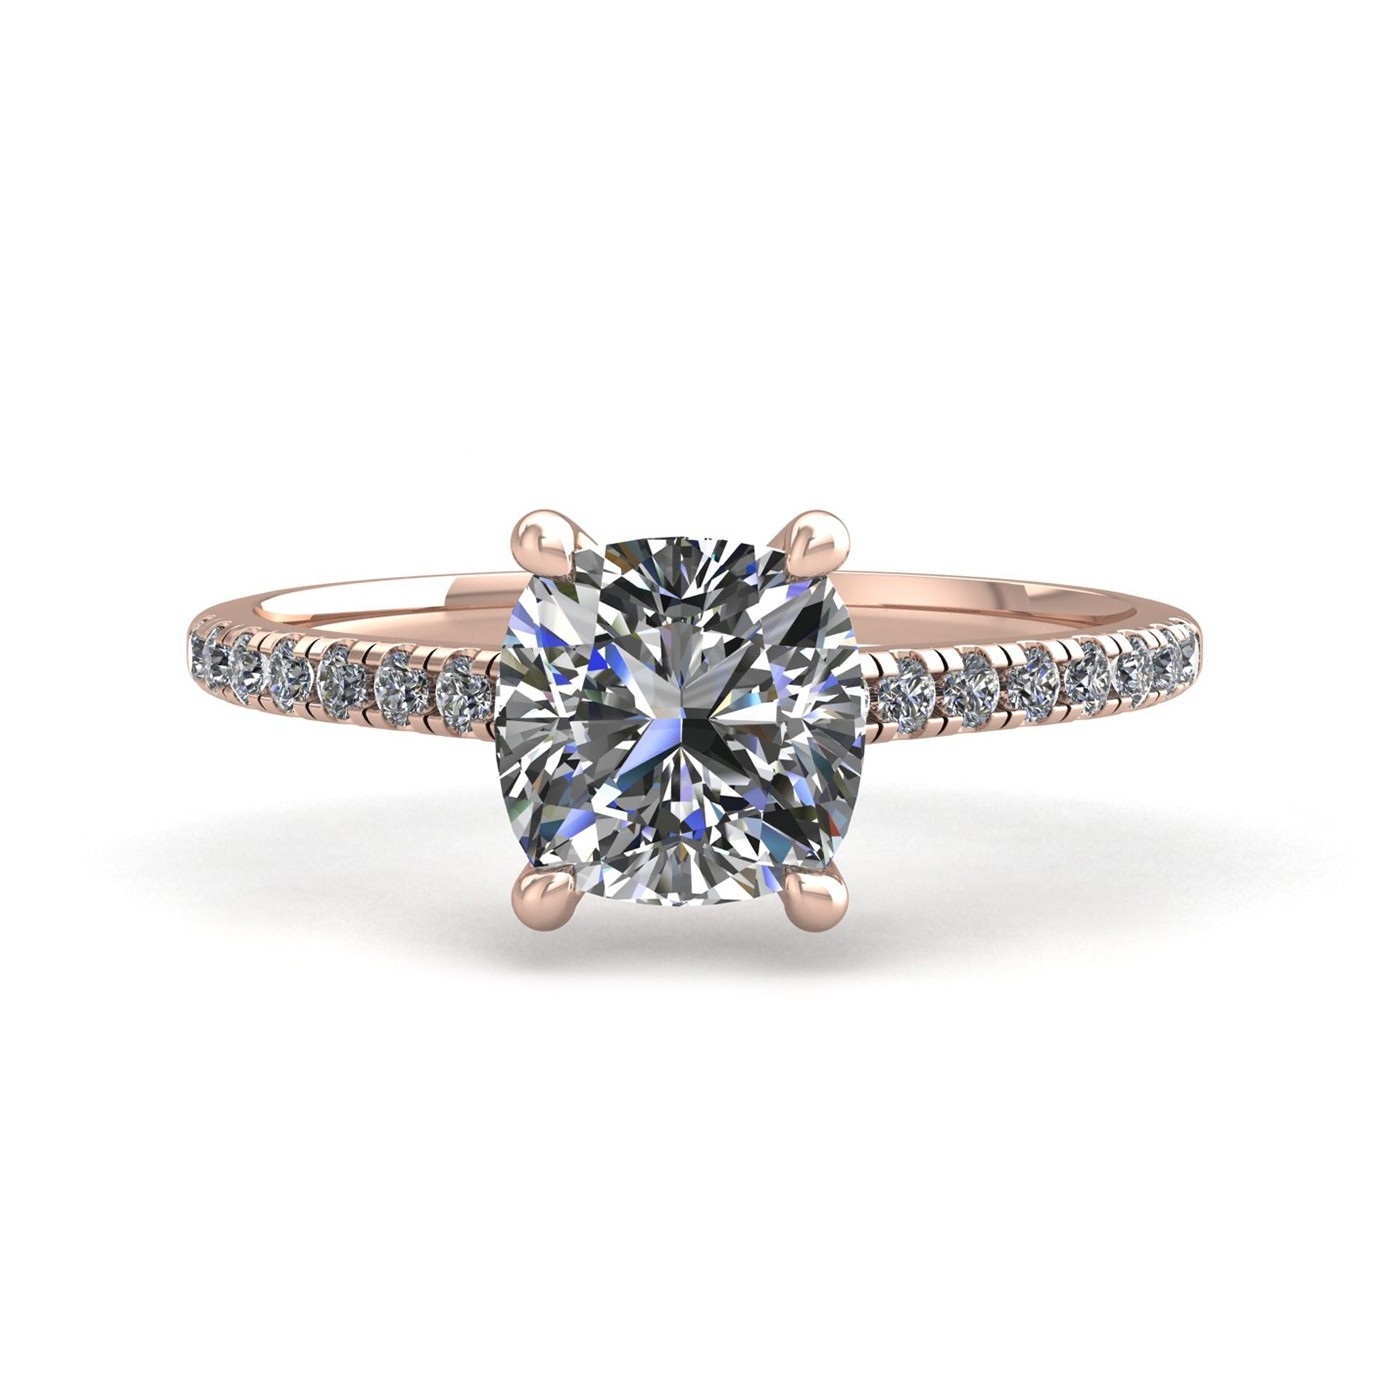 18k rose gold 2.0ct 4 prongs cushion cut diamond engagement ring with whisper thin pavÉ set band Photos & images